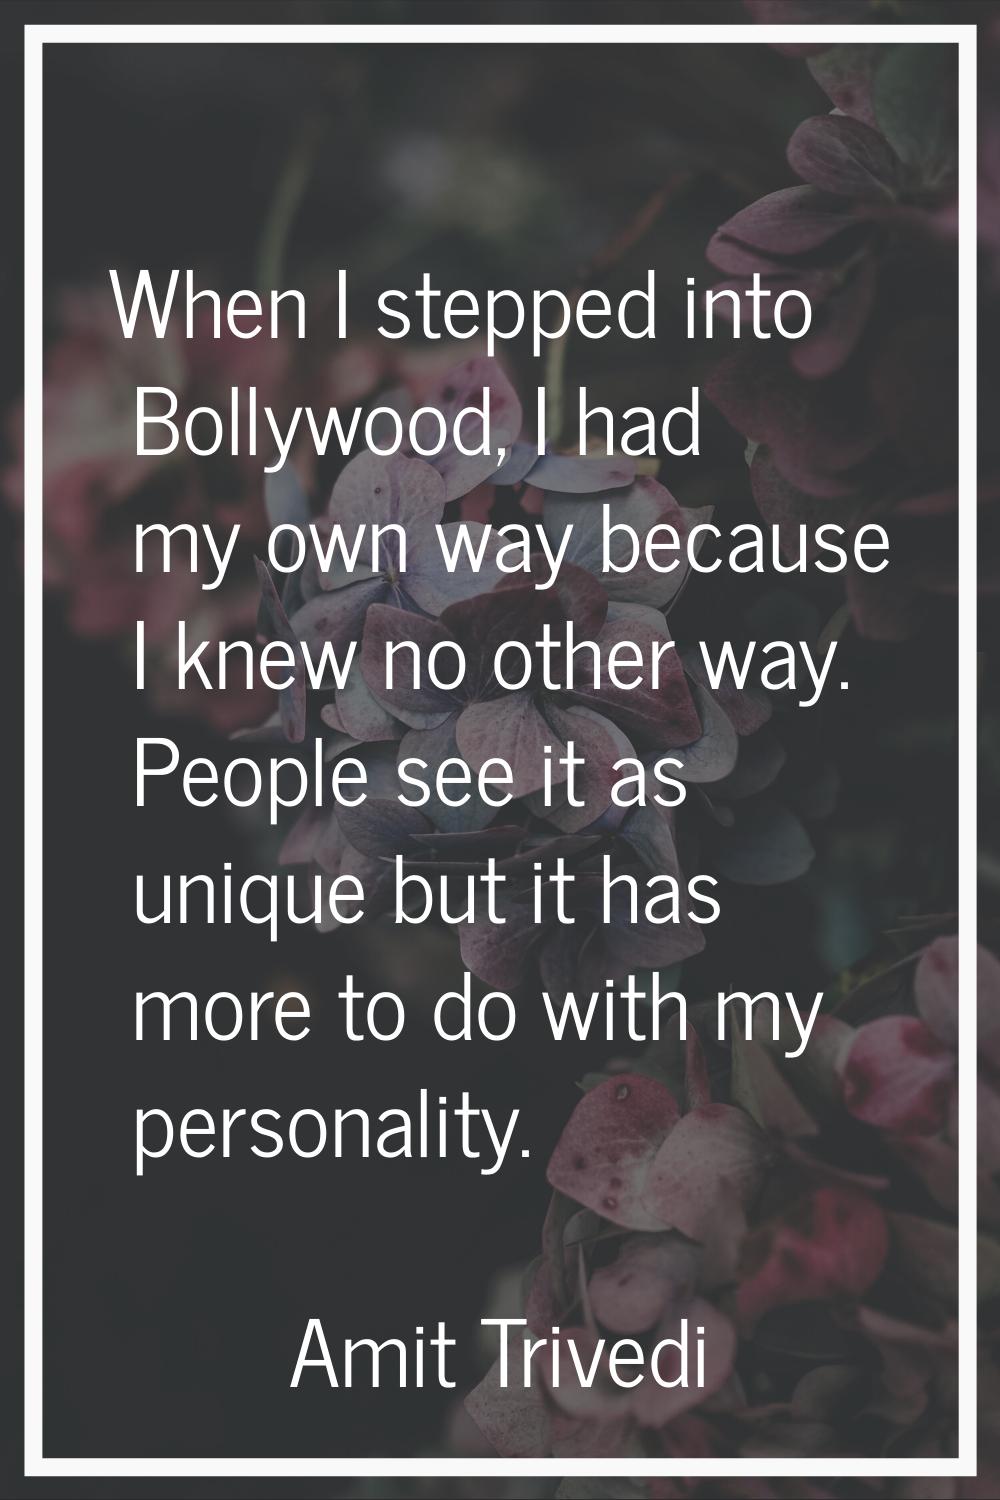 When I stepped into Bollywood, I had my own way because I knew no other way. People see it as uniqu